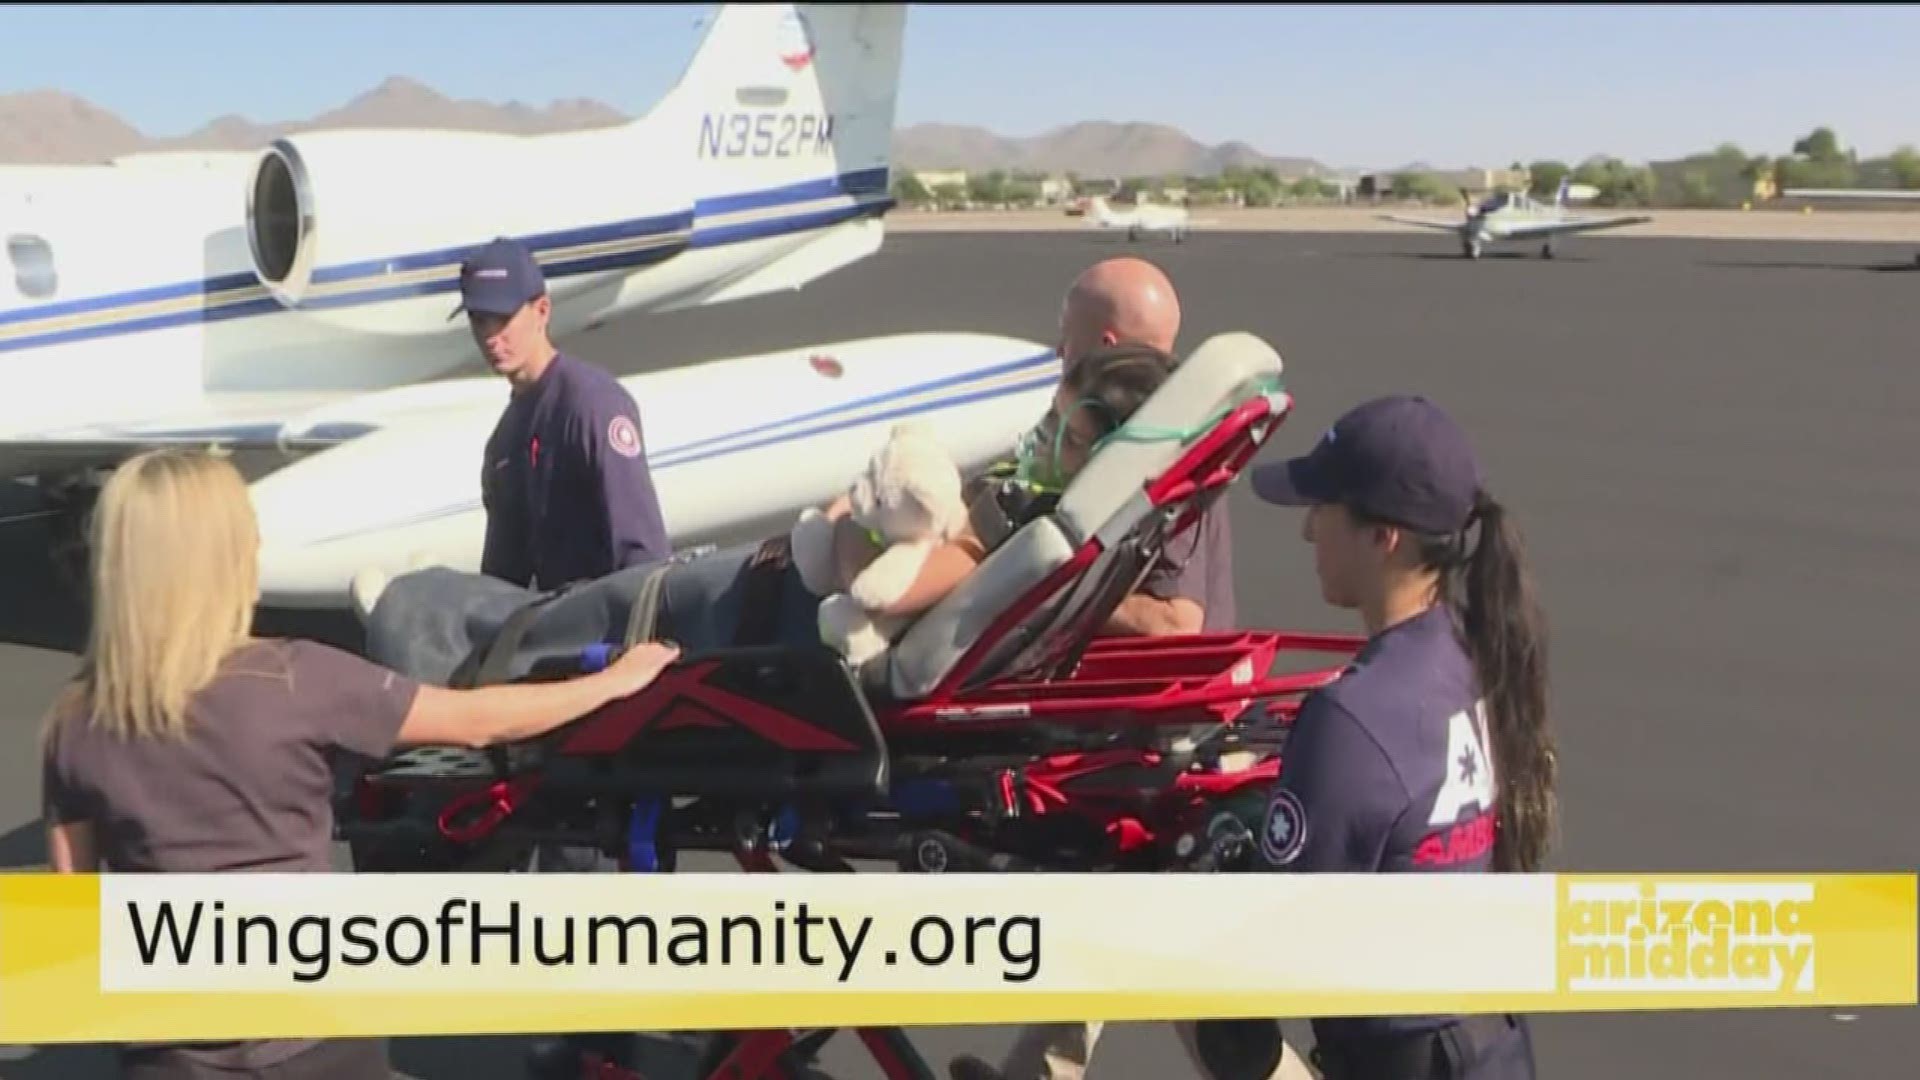 Stan Strom, CEO of Wings of Humanity, tells us how this organization is helping children with medical problems by offering flights to get them to the care they need.